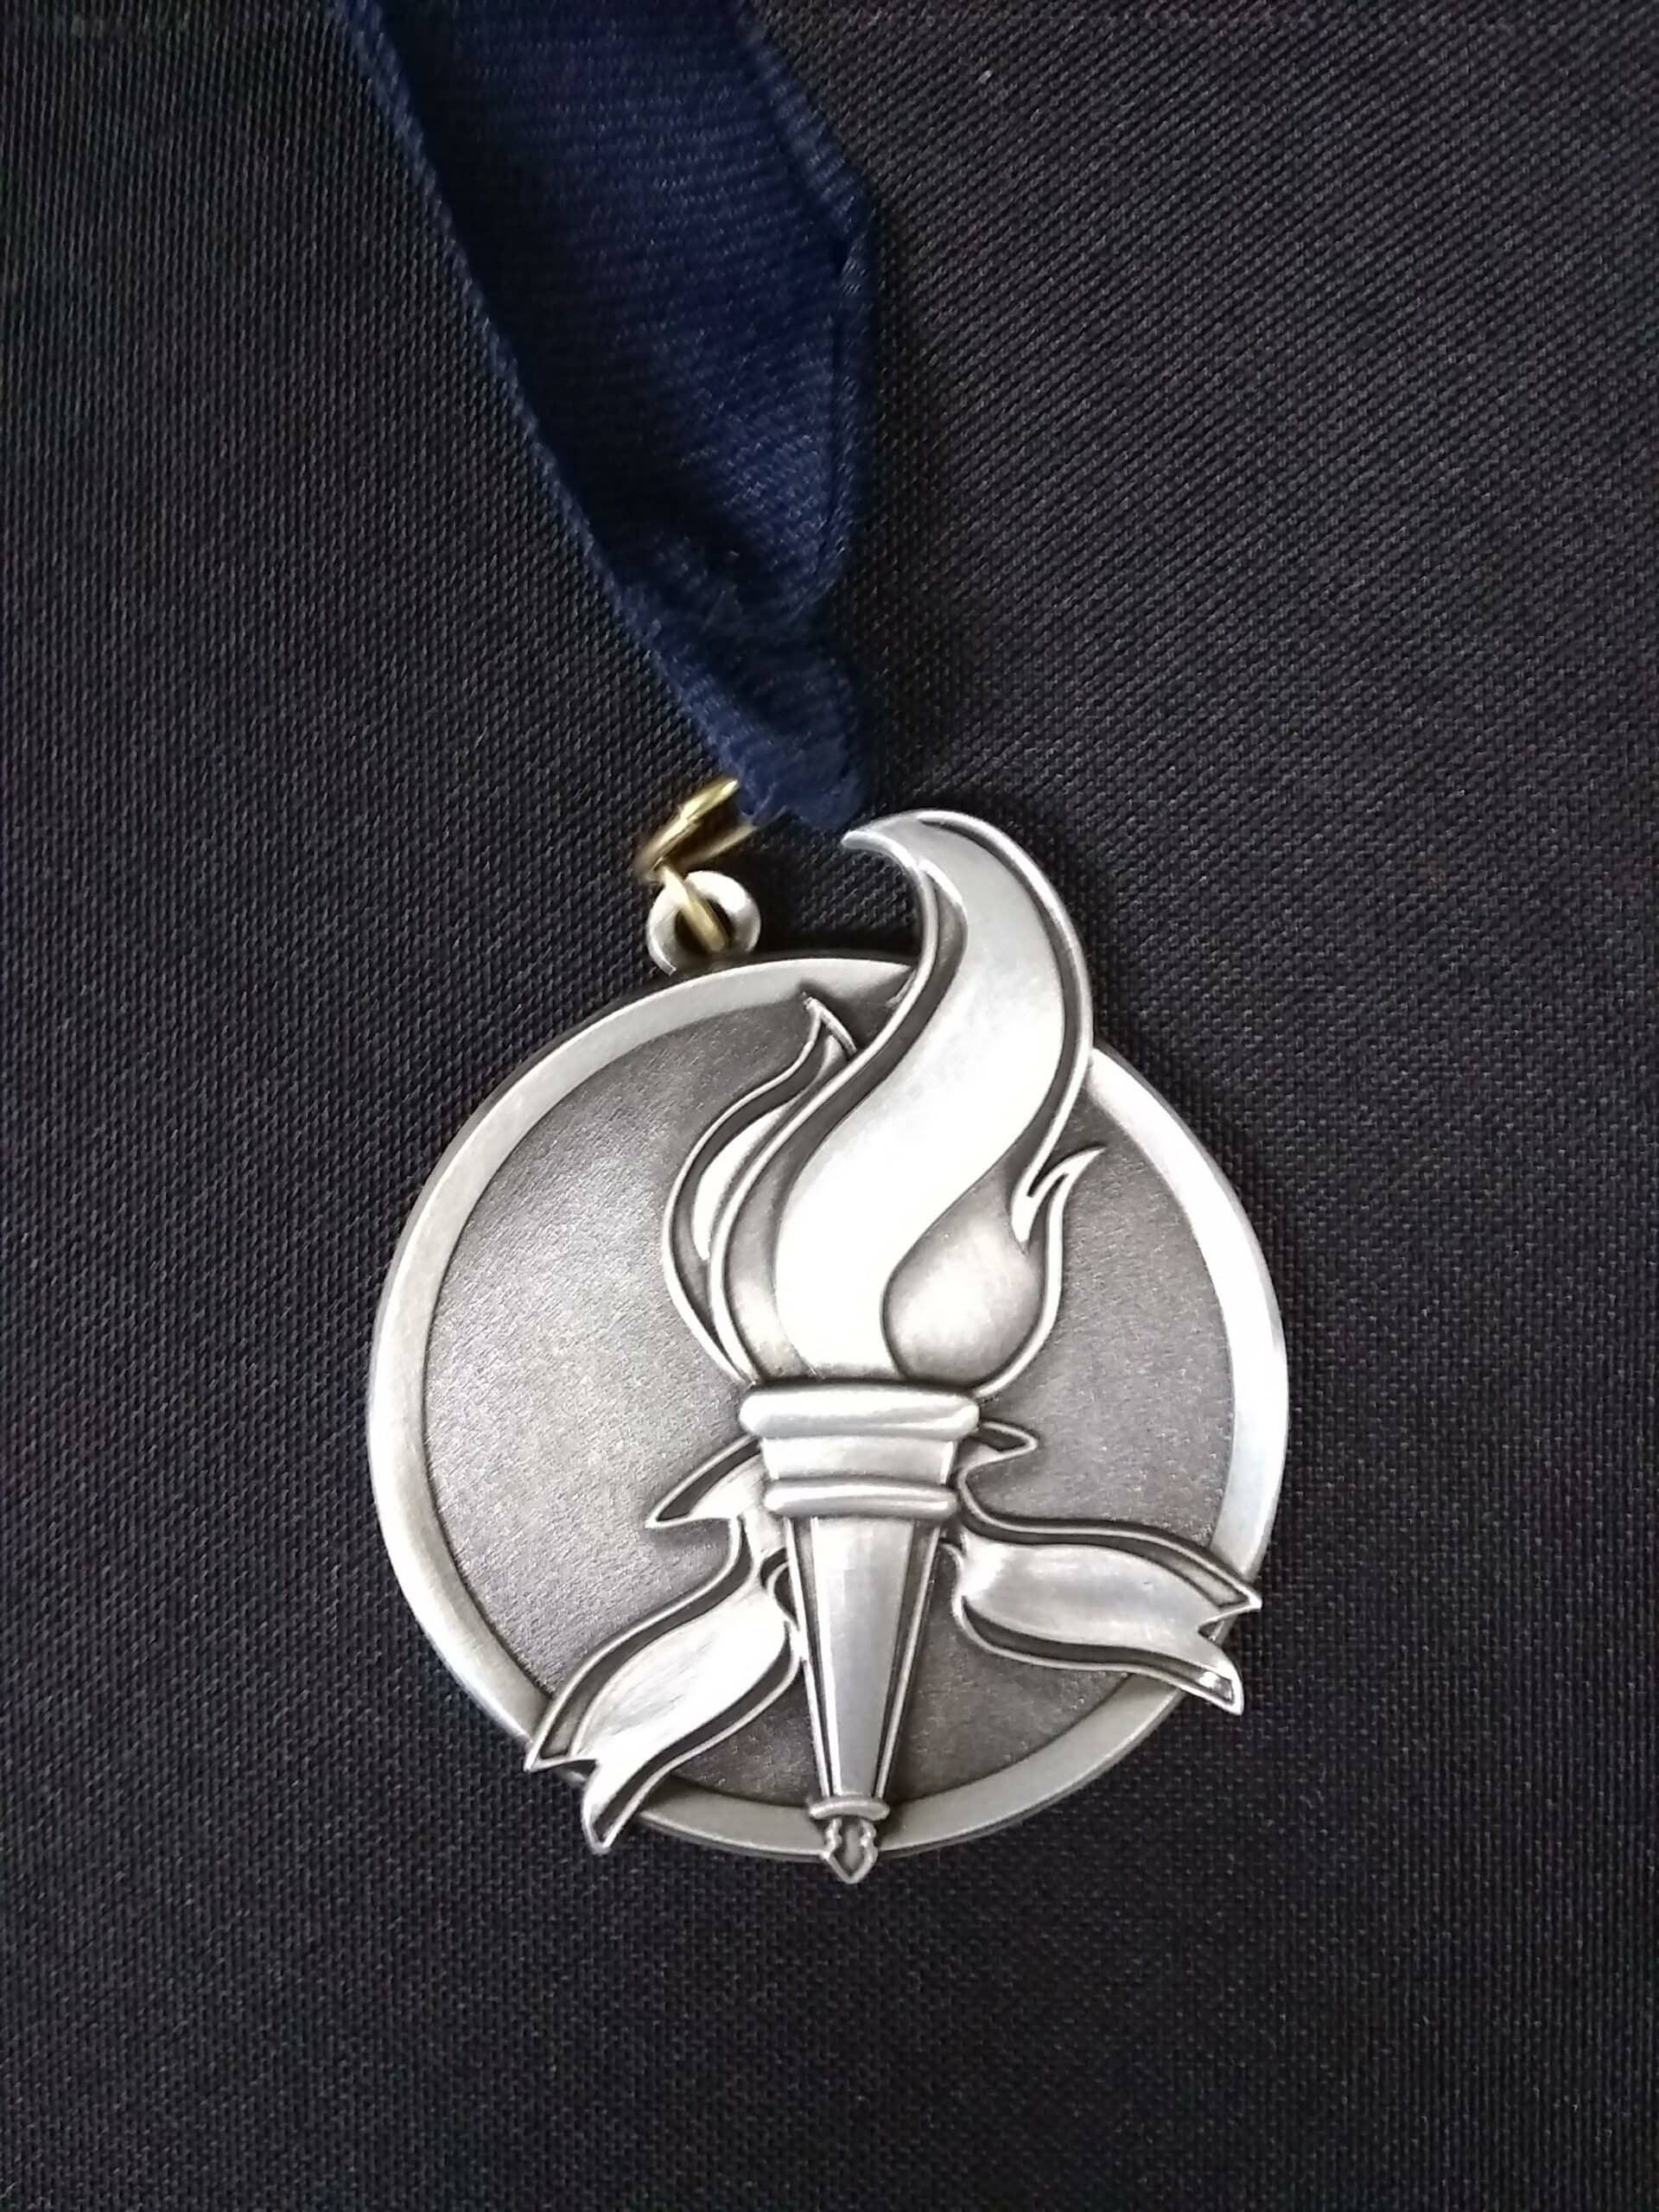 The Class 5 medal featuring a blazing torch.